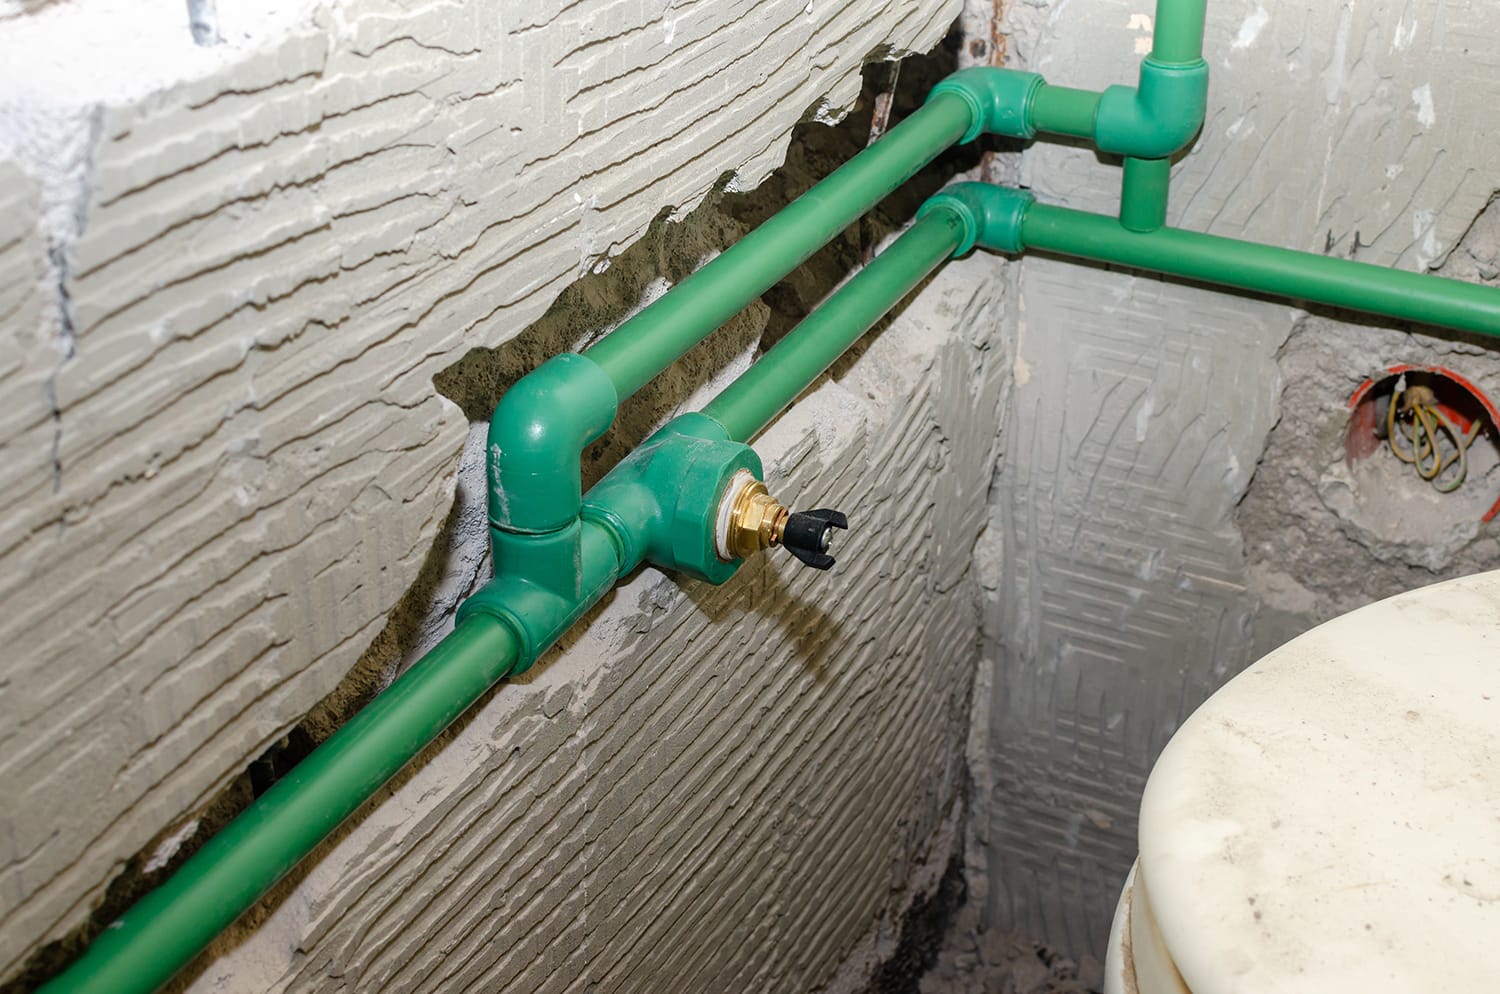 New plastic water pipes installed in a chased bathroom wall during renovation works